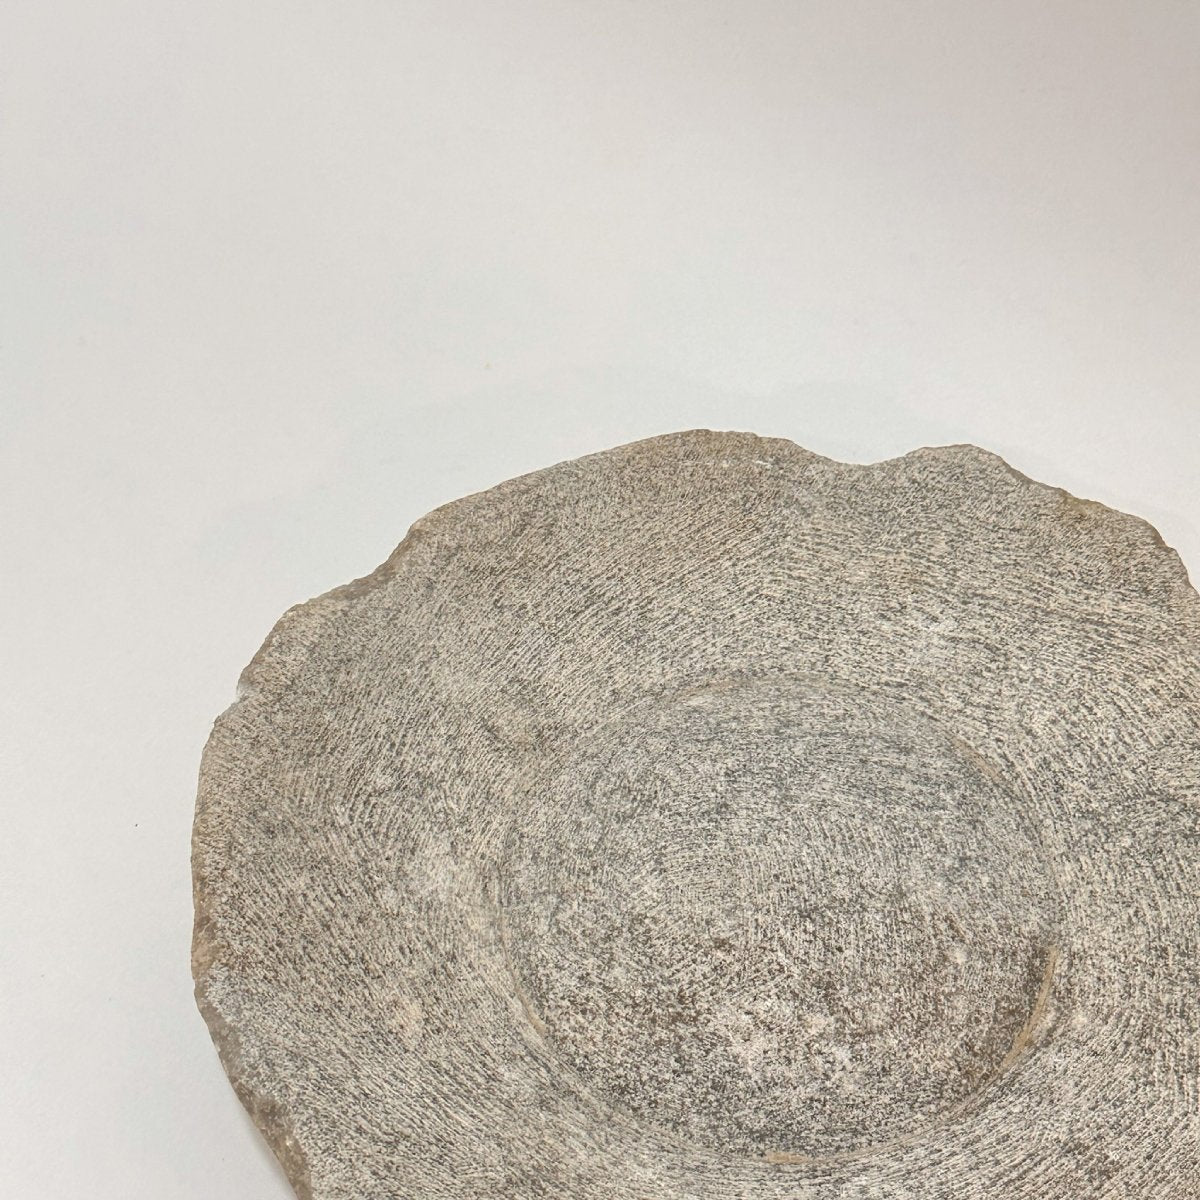 Antiqued Stone Bowl - Light Grey - SpaceHavenHome